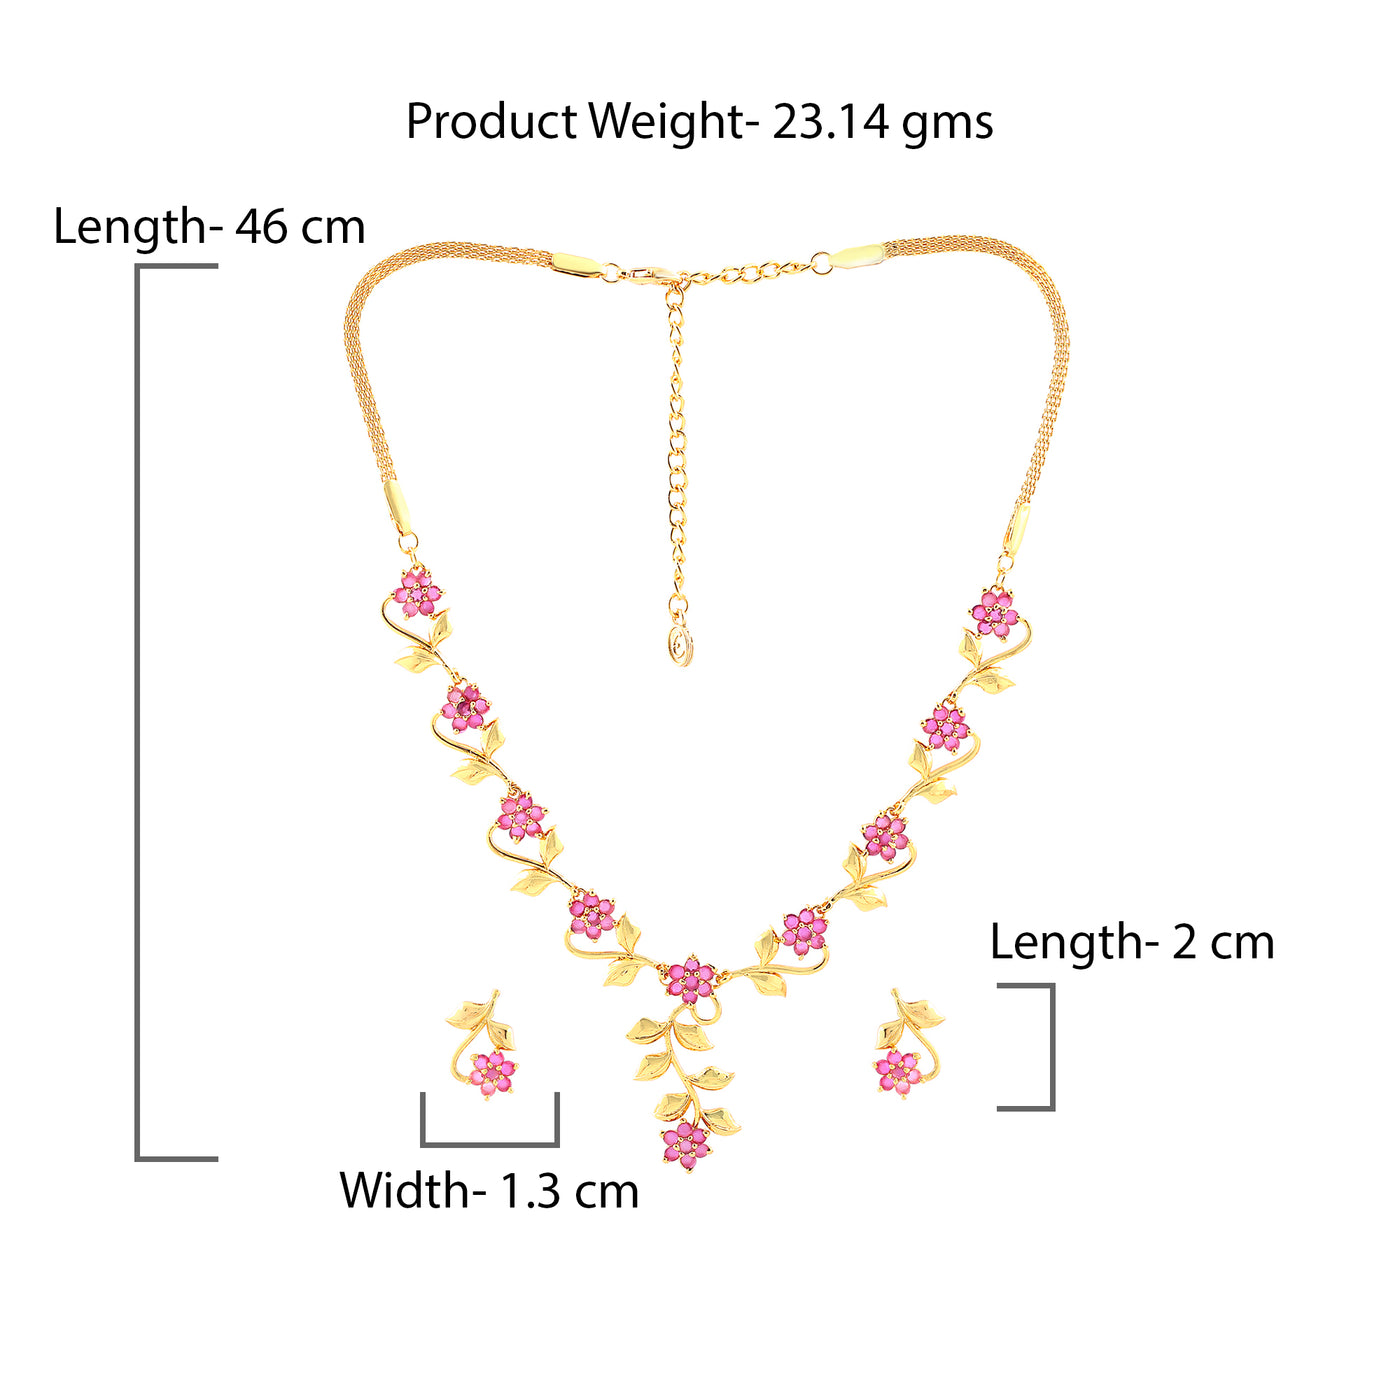 Estele Gold Plated Traditional Flower Designer Jewellery Set with Ruby Stones for Women